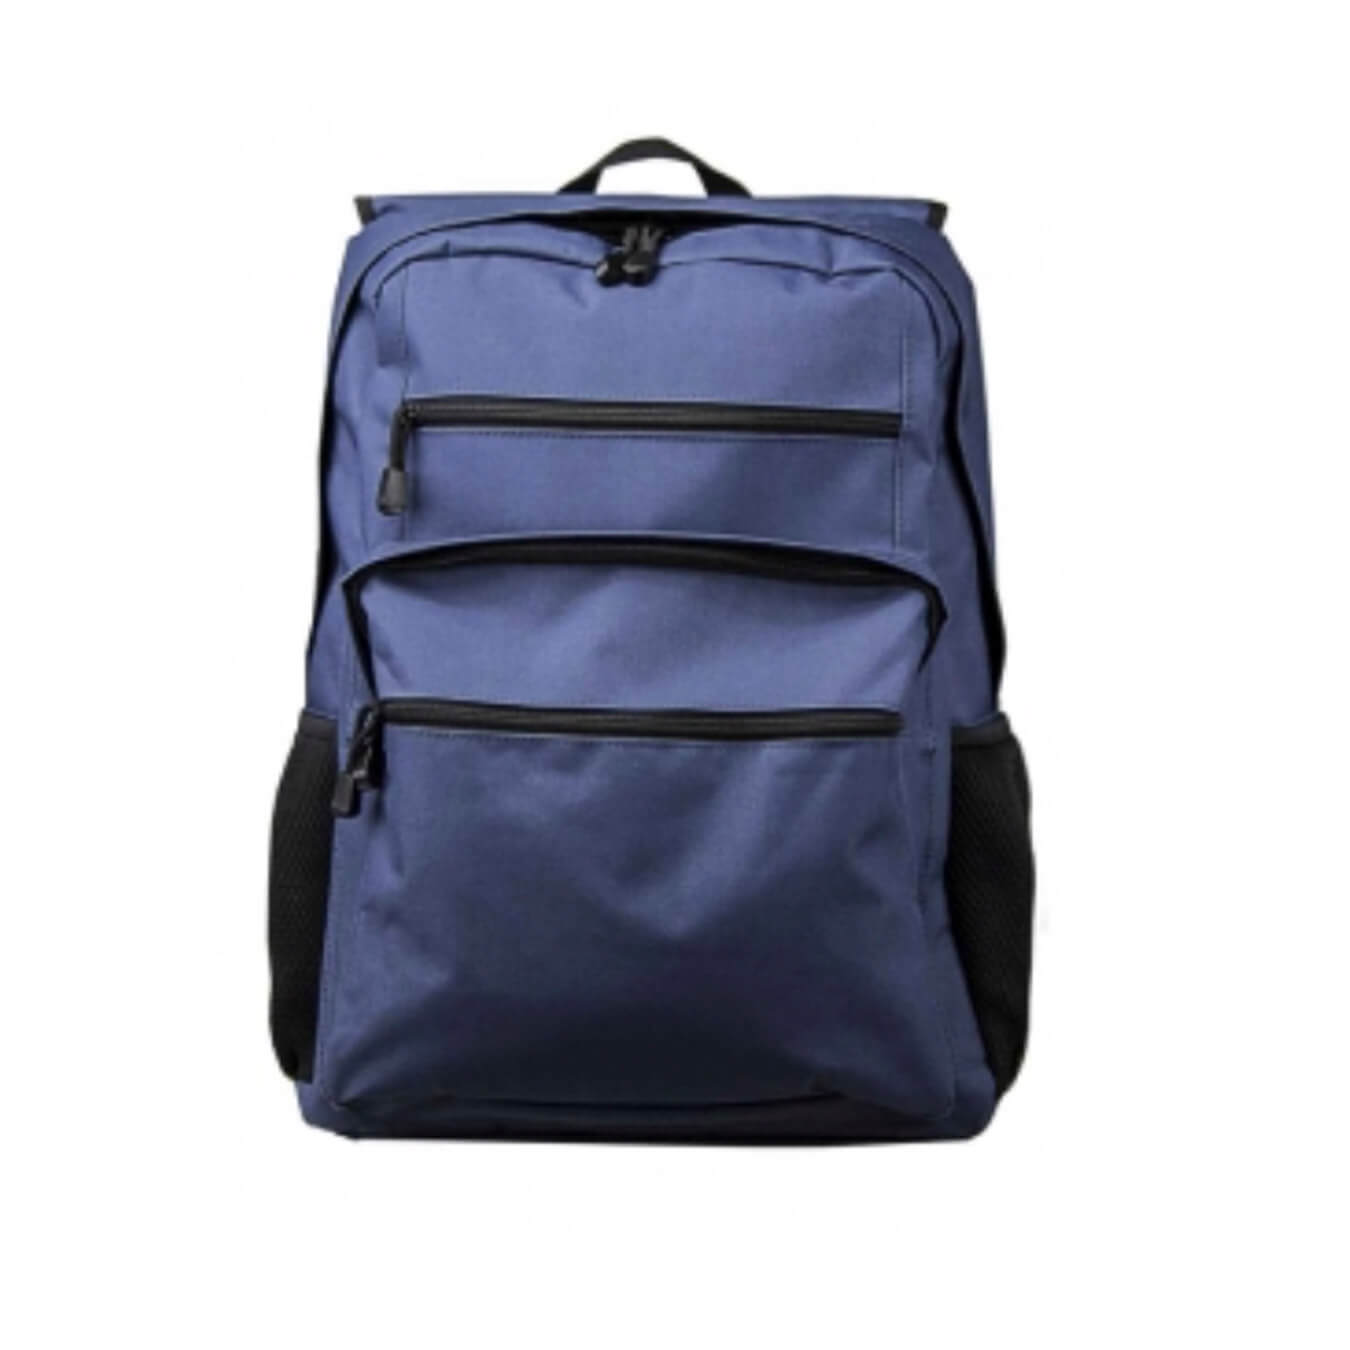 Bulletproof Backpack Model 3003 with Level IIIA Front and Rear Armor Compartments - Guardian Gear